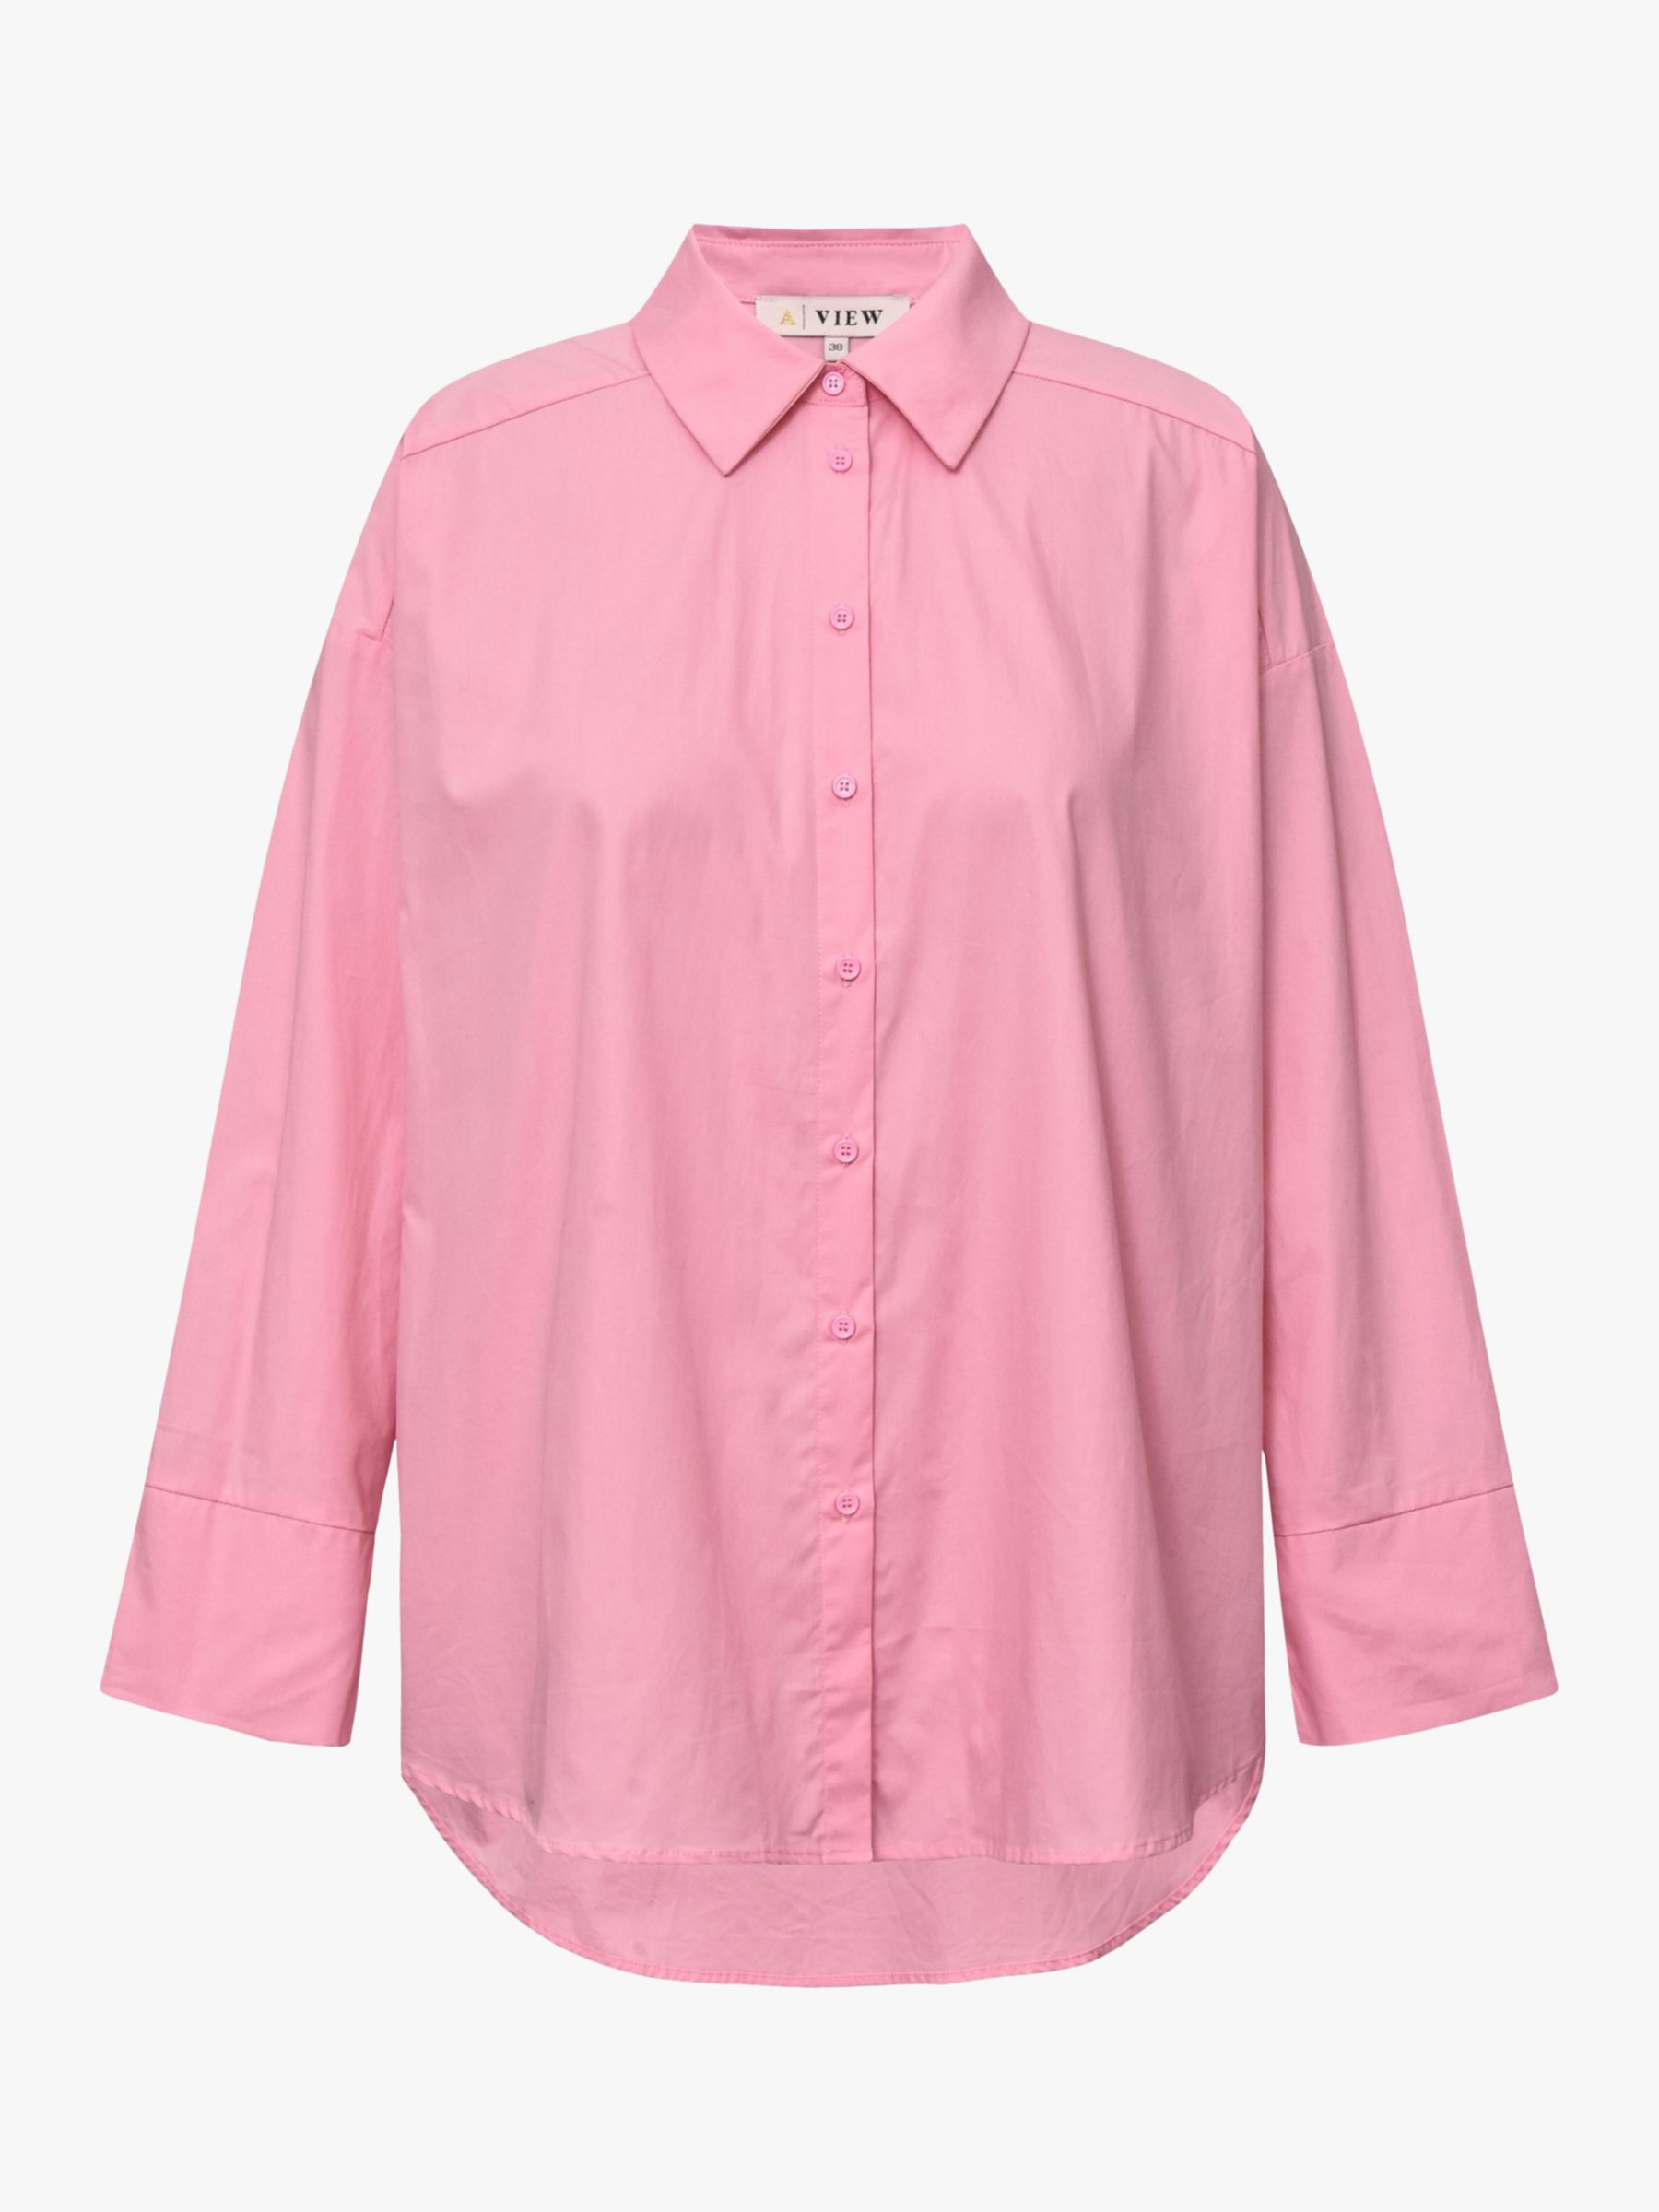 Buy A-VIEW Magnolia Cotton Loose Shirt Online at johnlewis.com